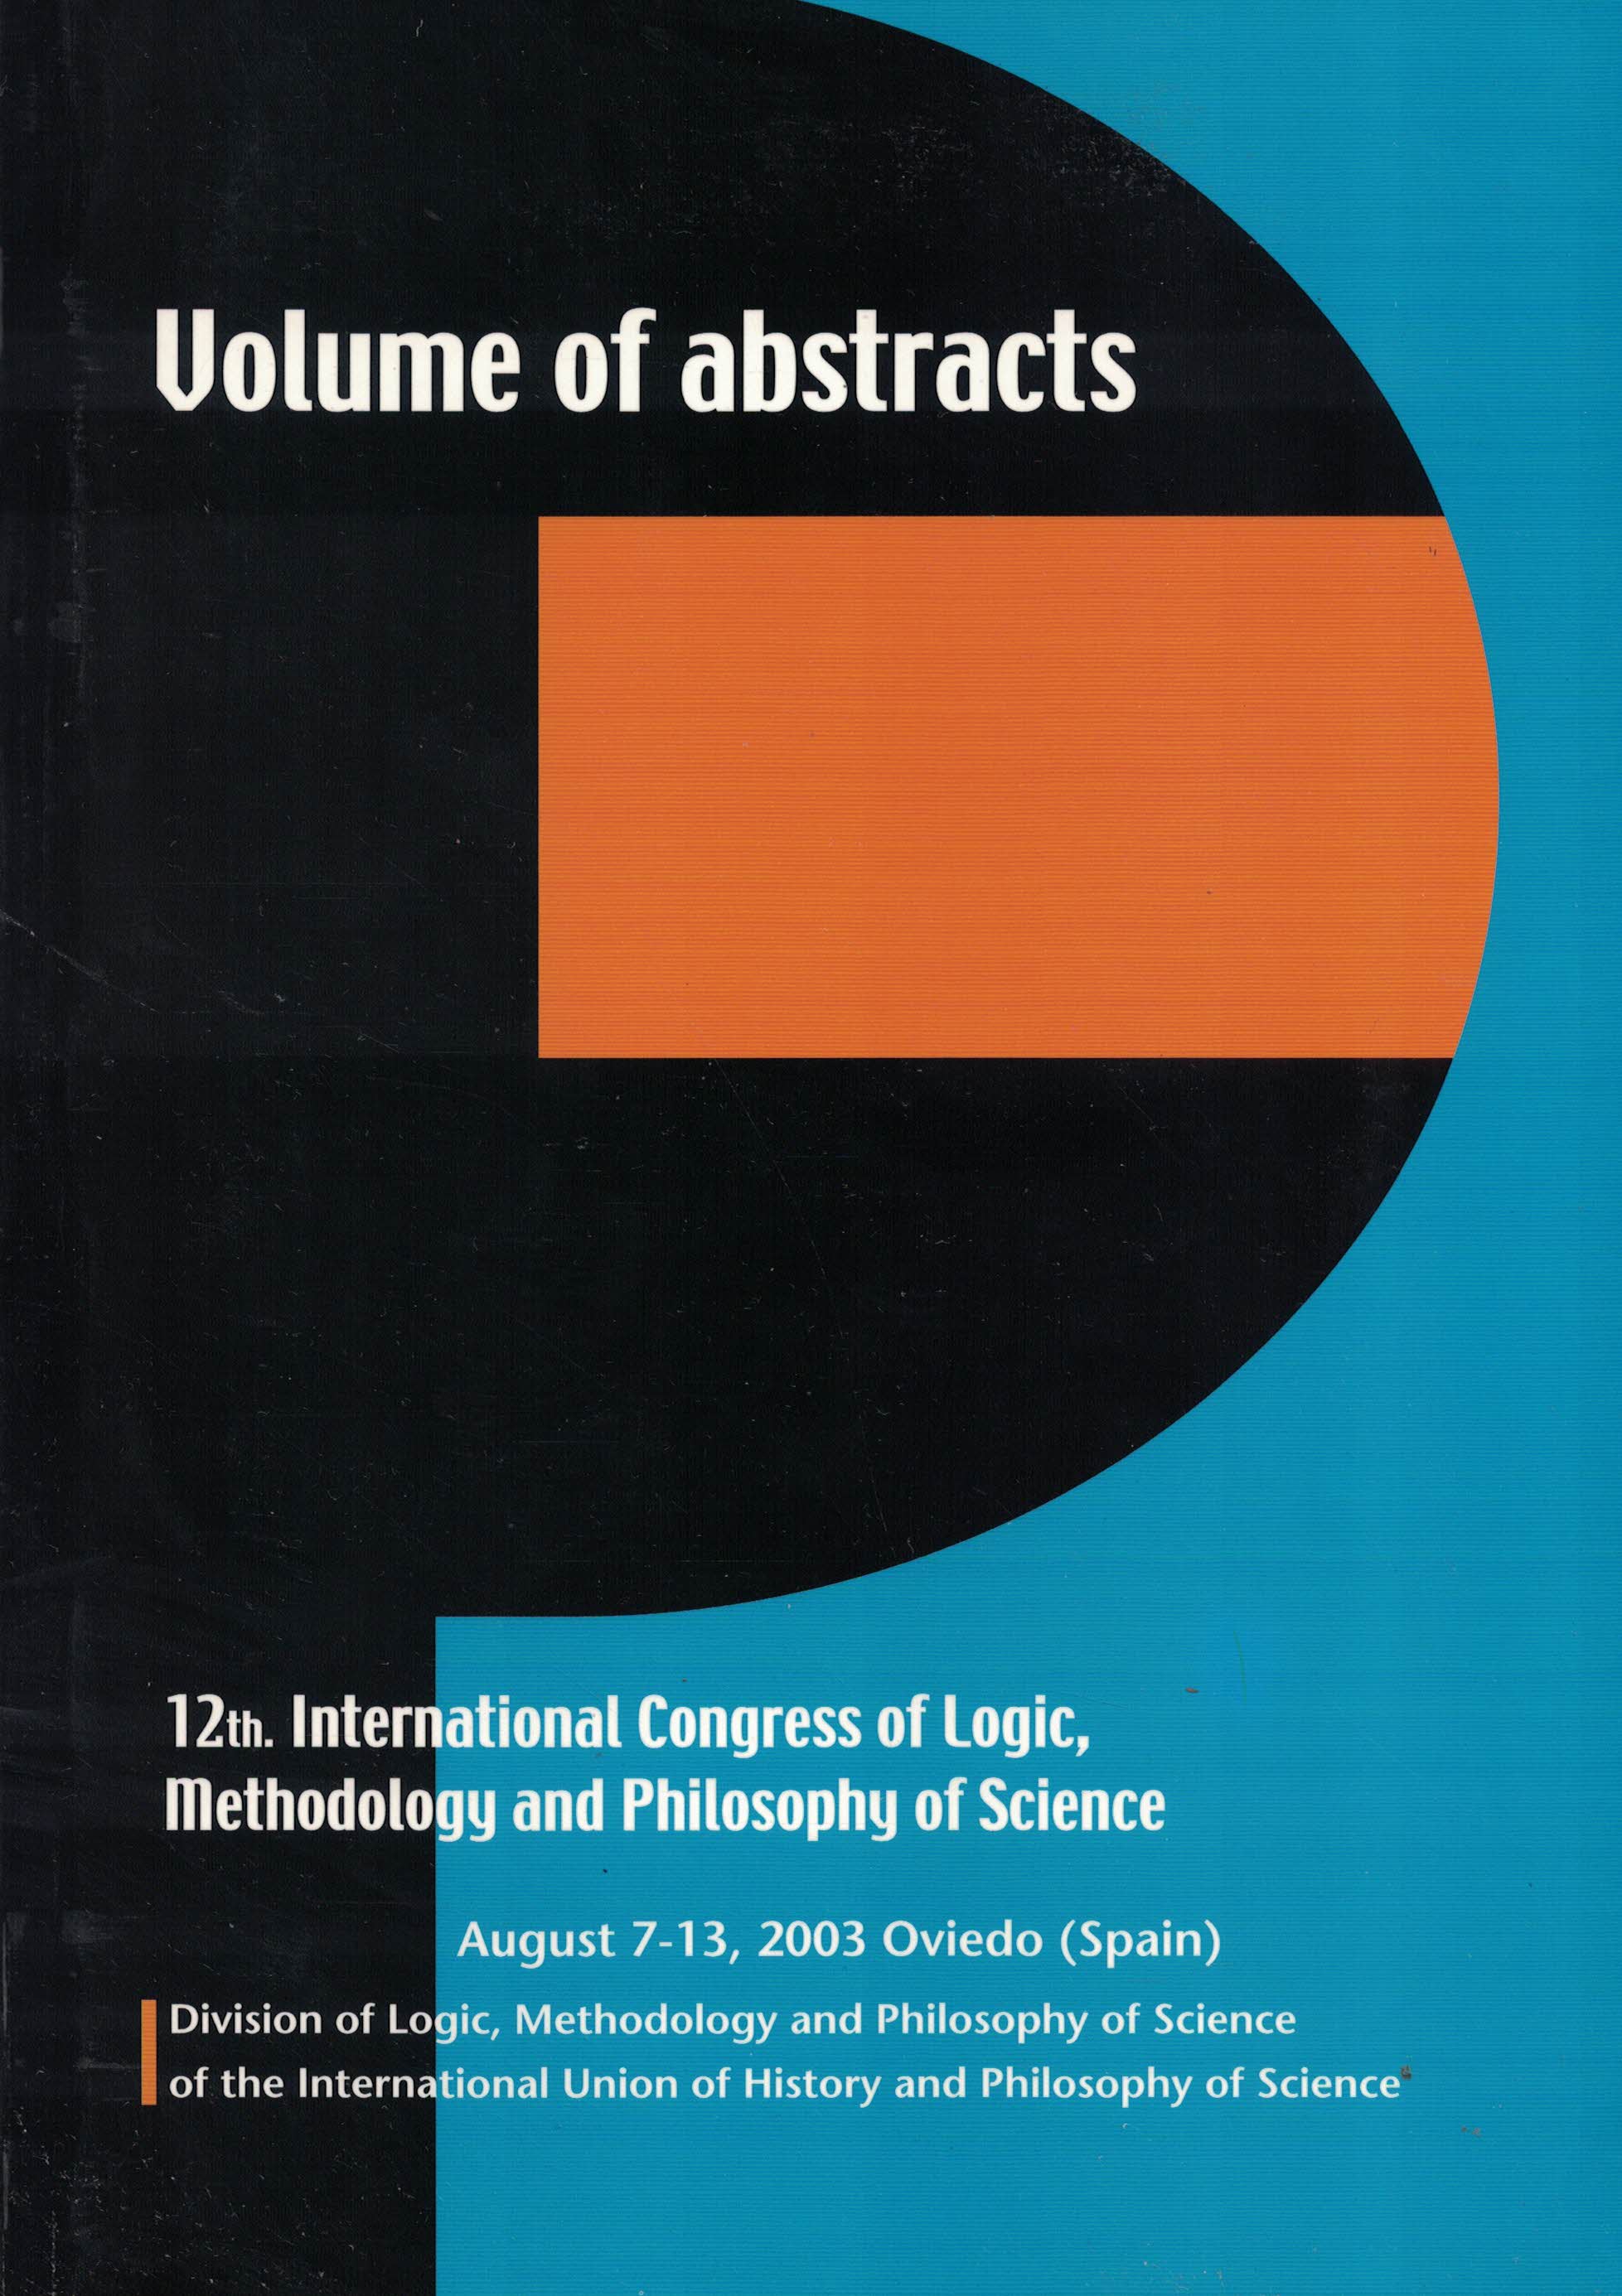 Volume of abstracts. 12th, International Congress of Logic, Methodology and Philosophy of Science. August 7-13, 2003 Oviedo (Spain) (PAQ9788460099130)